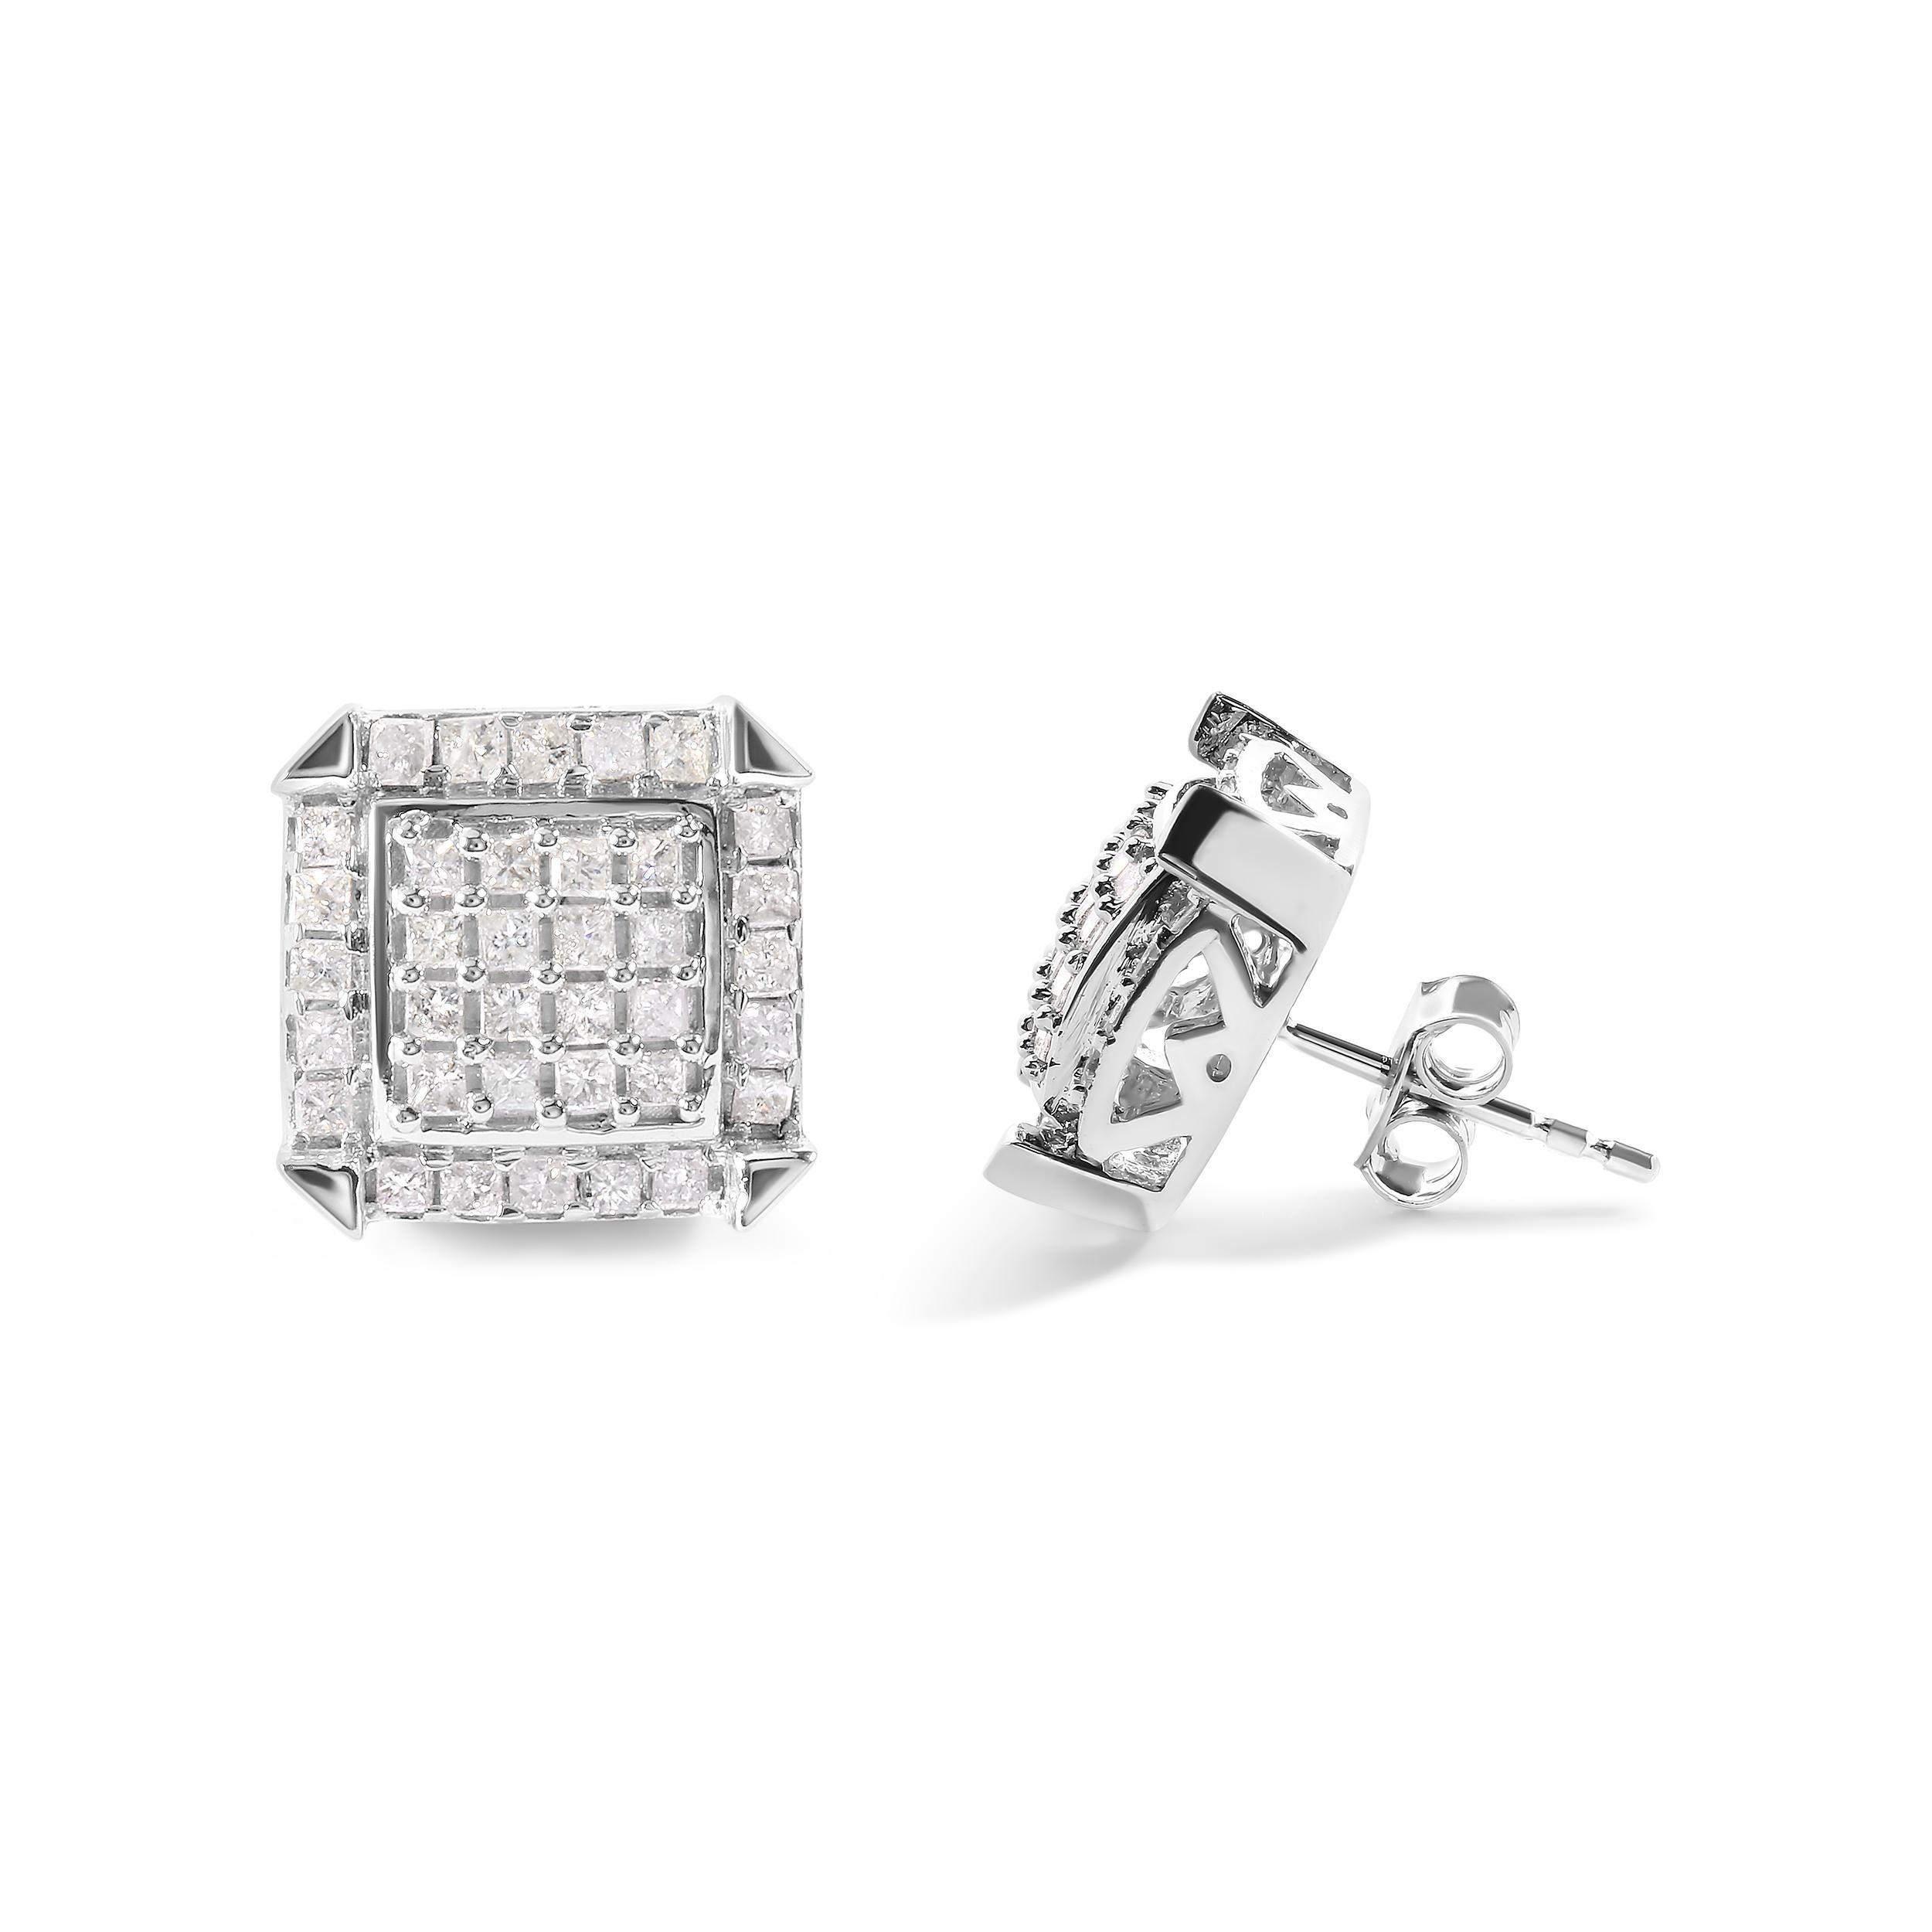 Contemporary 10K White Gold 1 1/10 Carat Princess Diamond Composite and Halo Stud Earrings For Sale